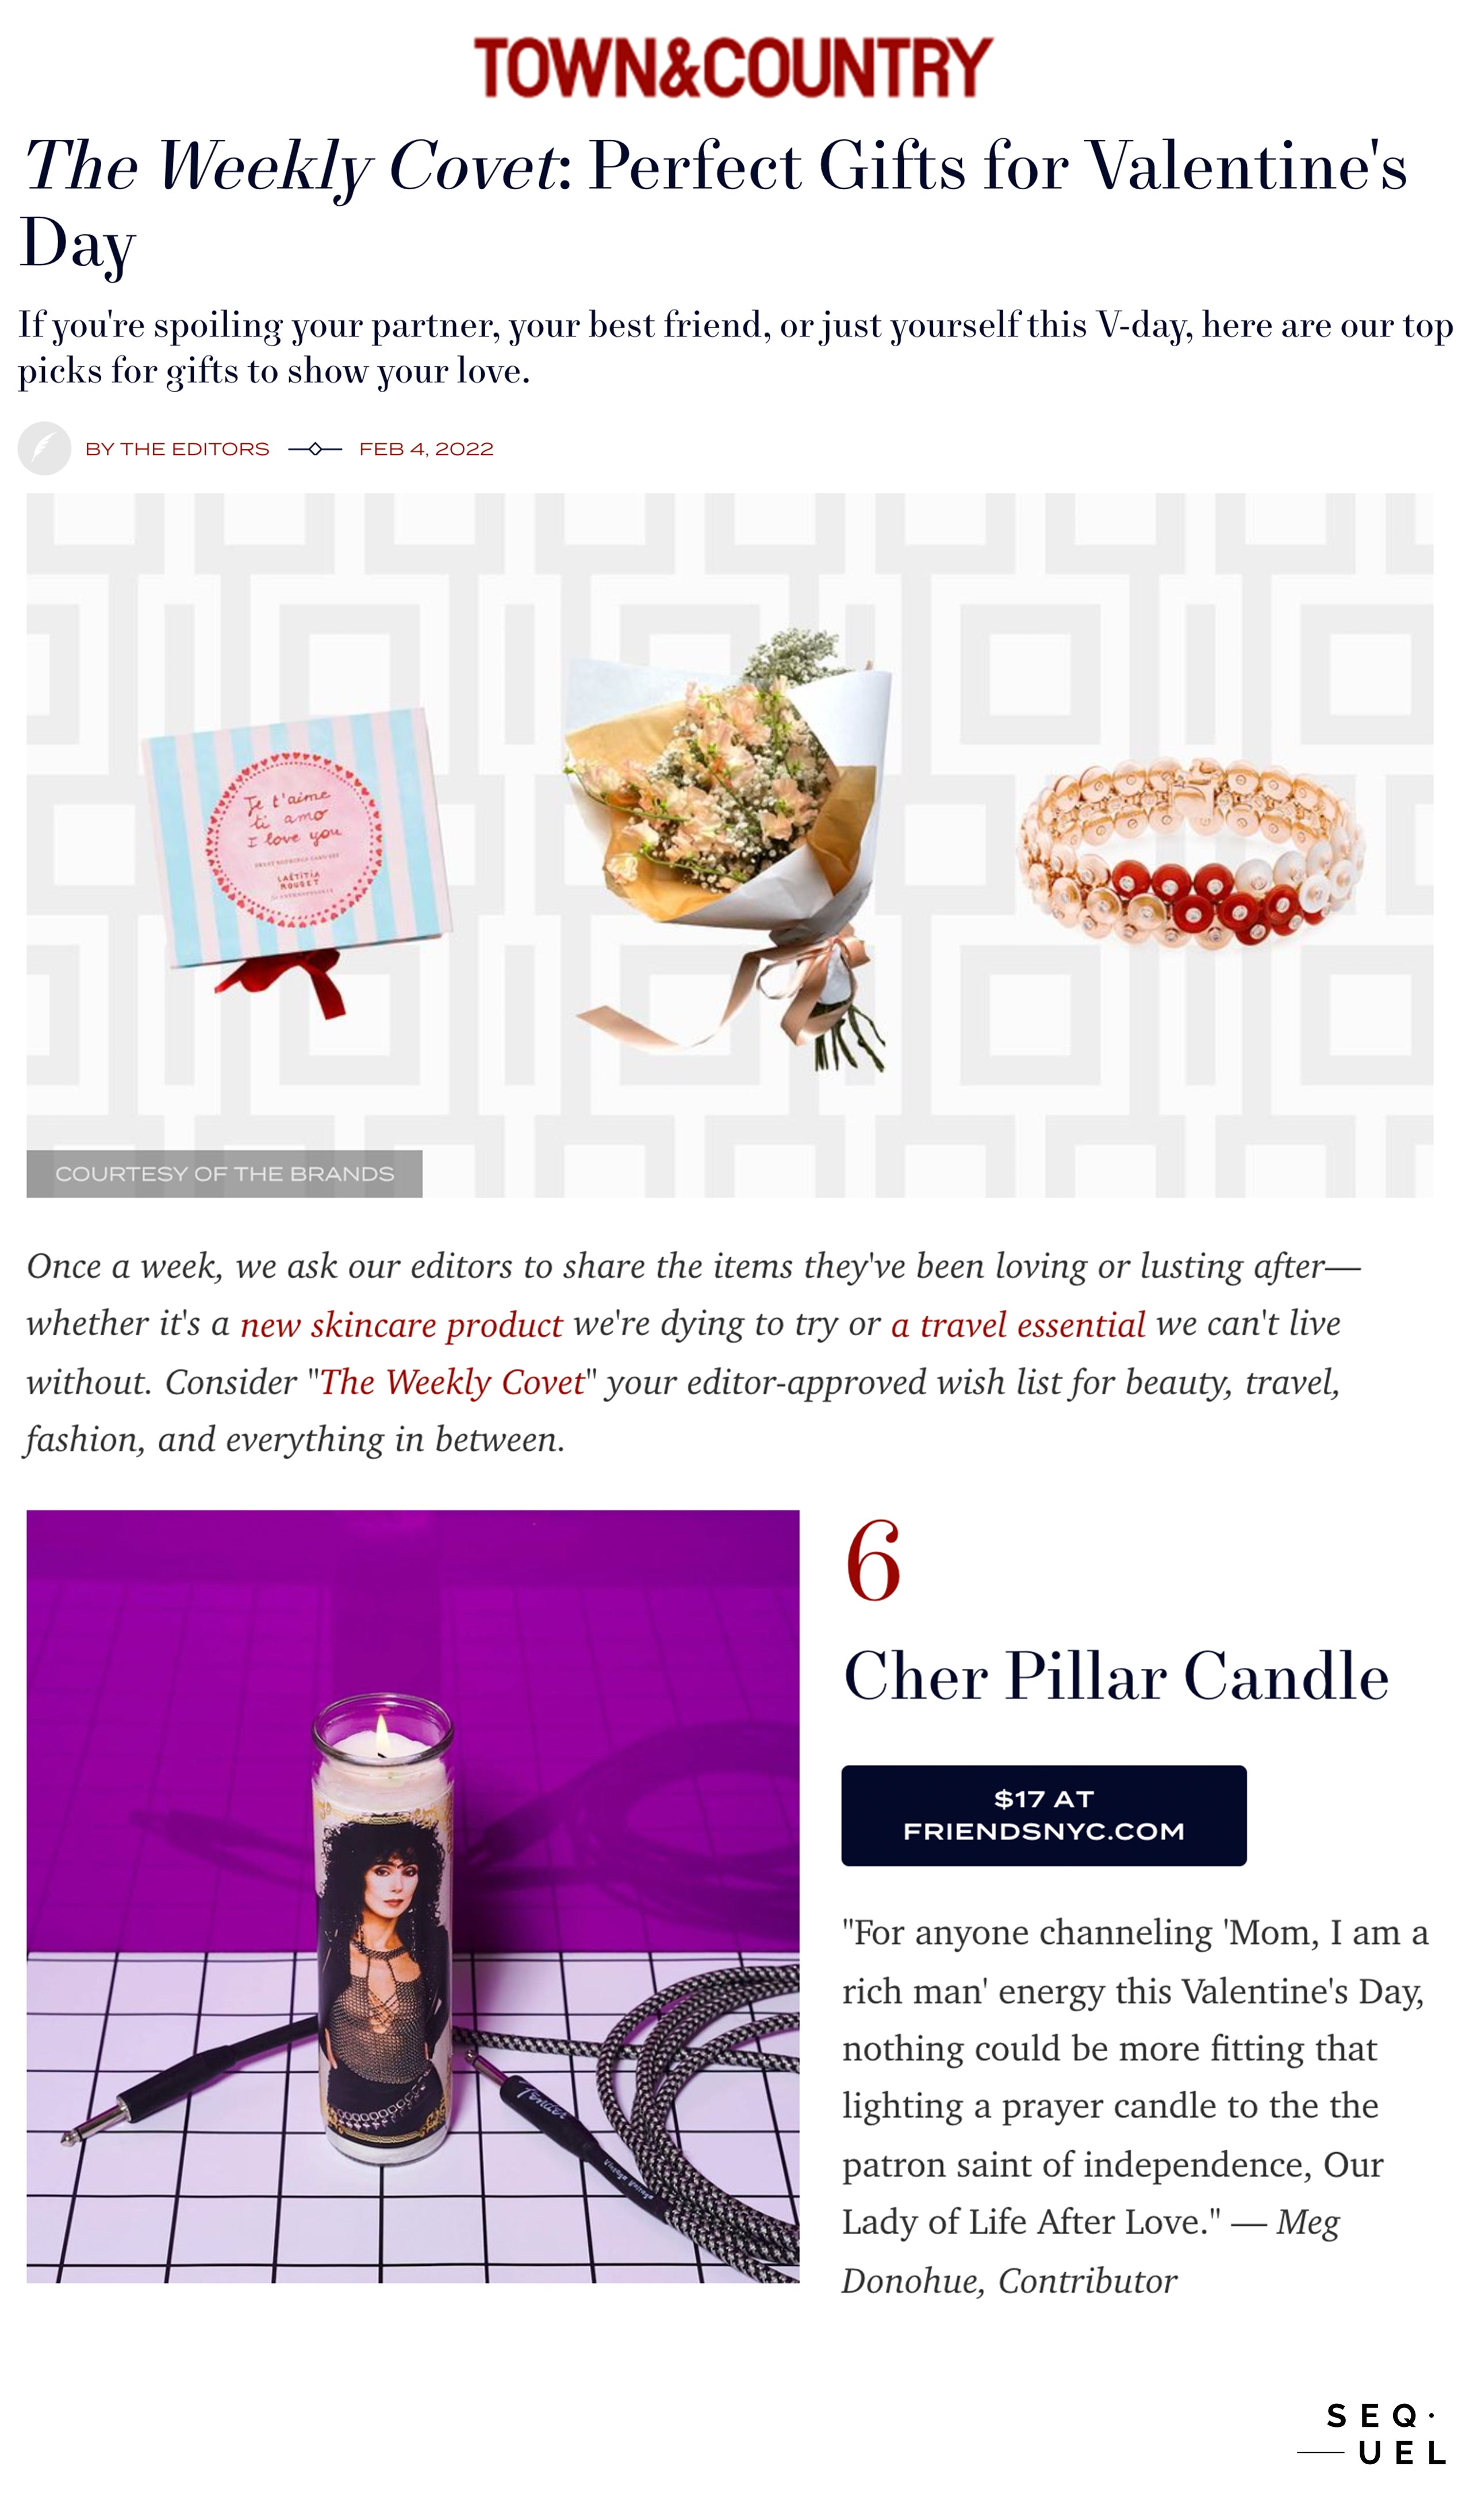 The Weekly Covet: Perfect Gifts for Valentine's Day